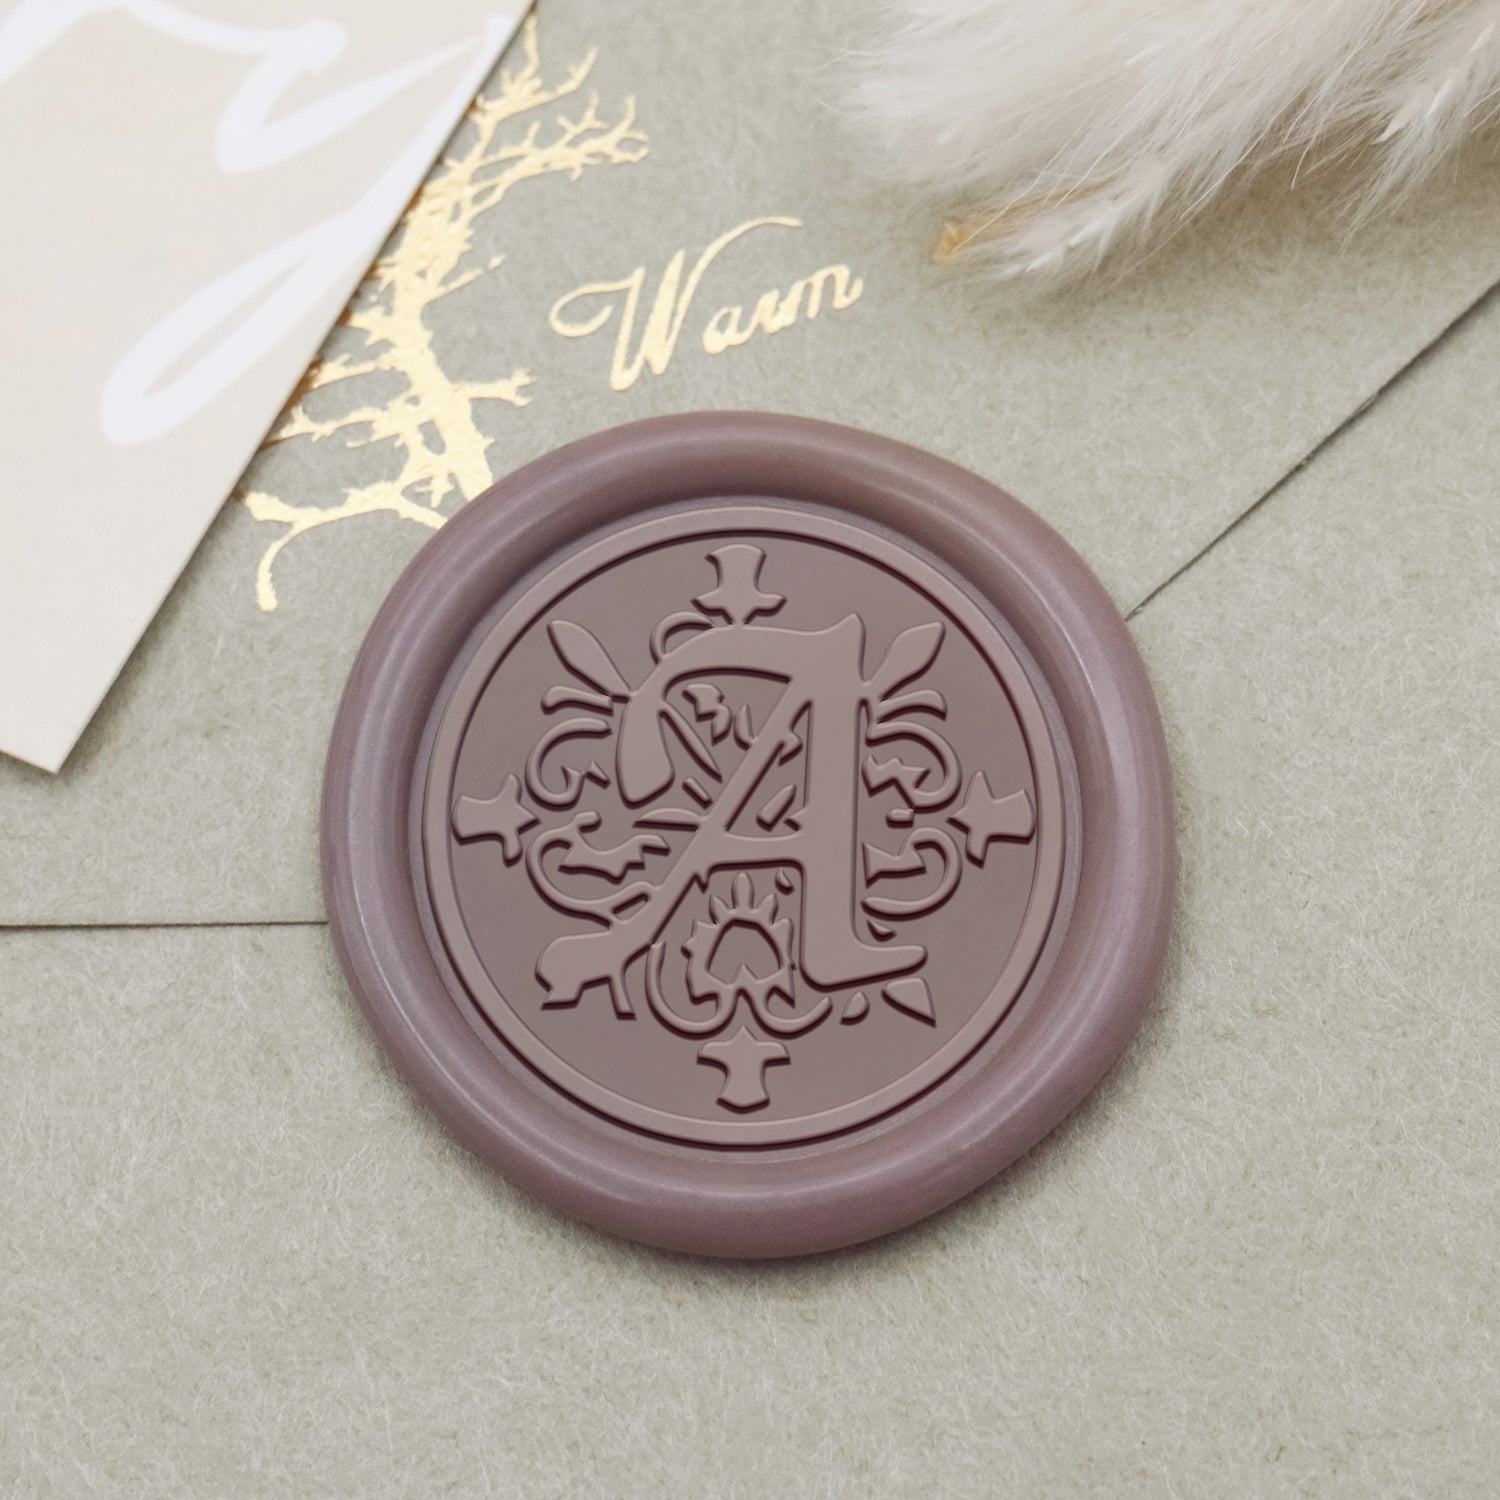 Wax seal stamp with letters of the alphabet - handwritten script J